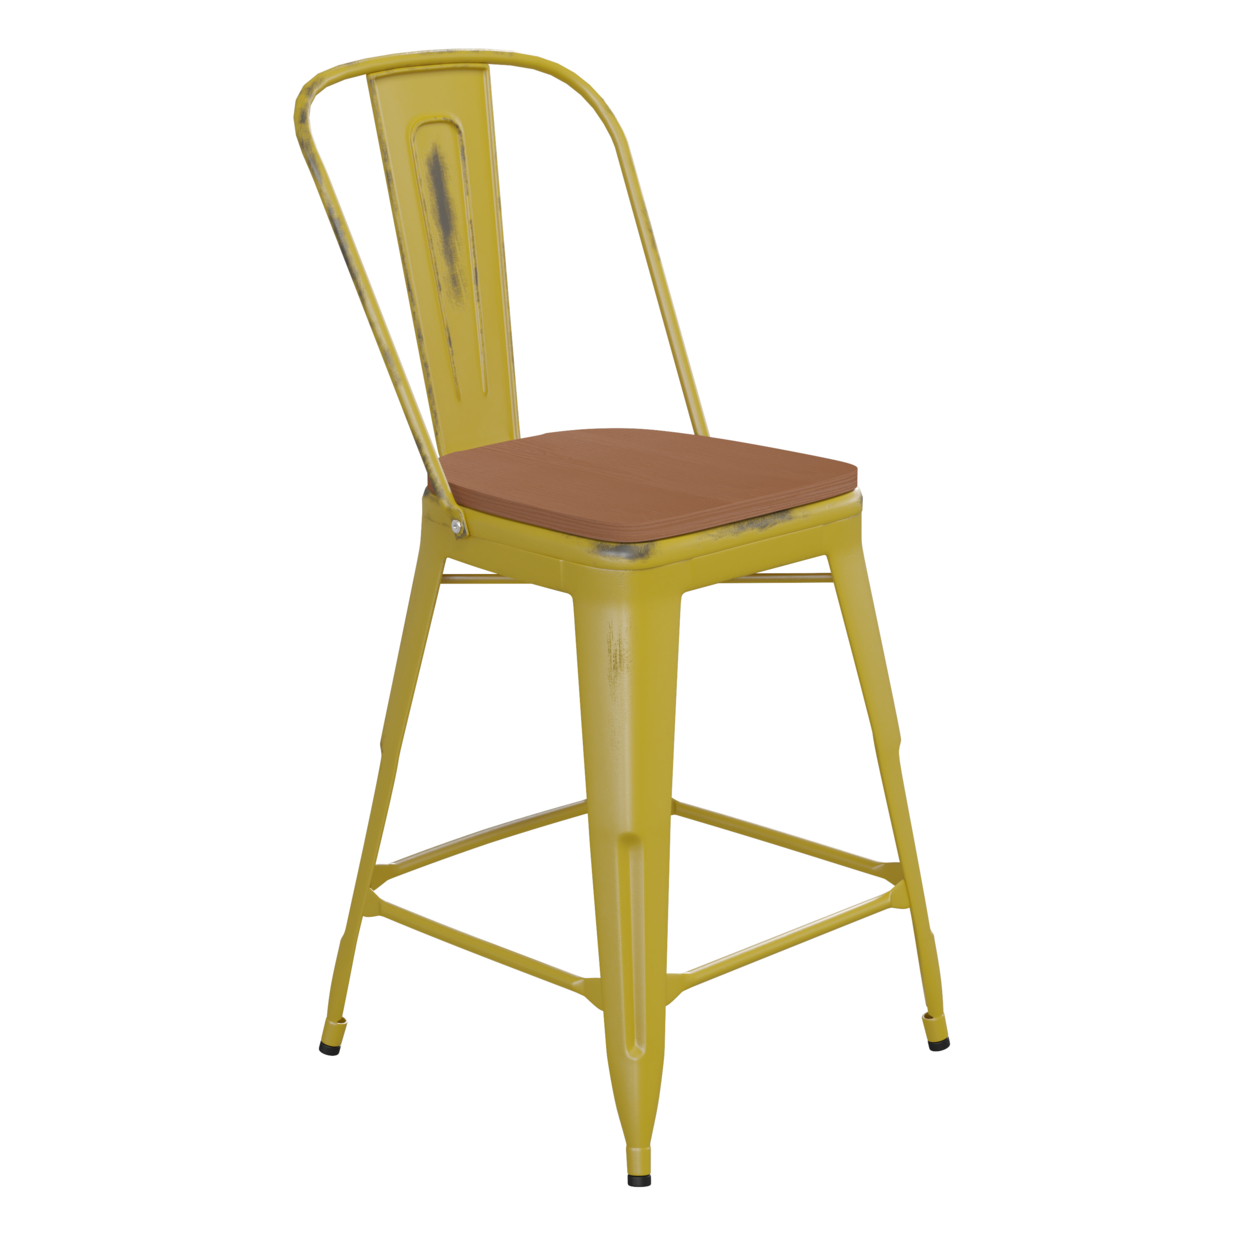 24 Inch Metal Counter Stool, Curved Open Back, Sleek Wood Seat, Yellow